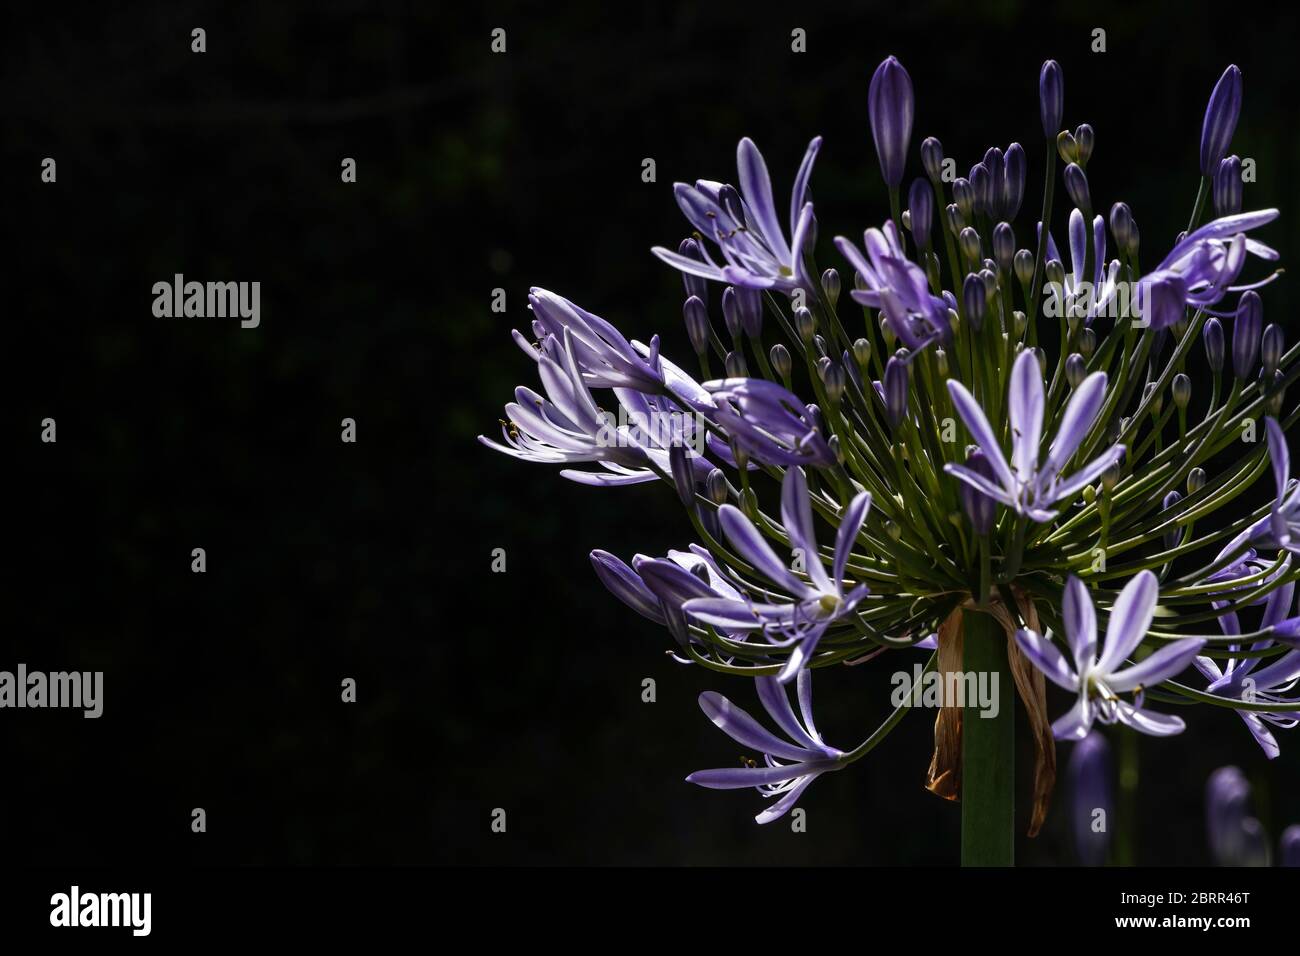 Close up of a sunlit blooming blue flower cluster of an Agapanthus against a dark background; flower is on right side, copy space on left.  Green stem Stock Photo